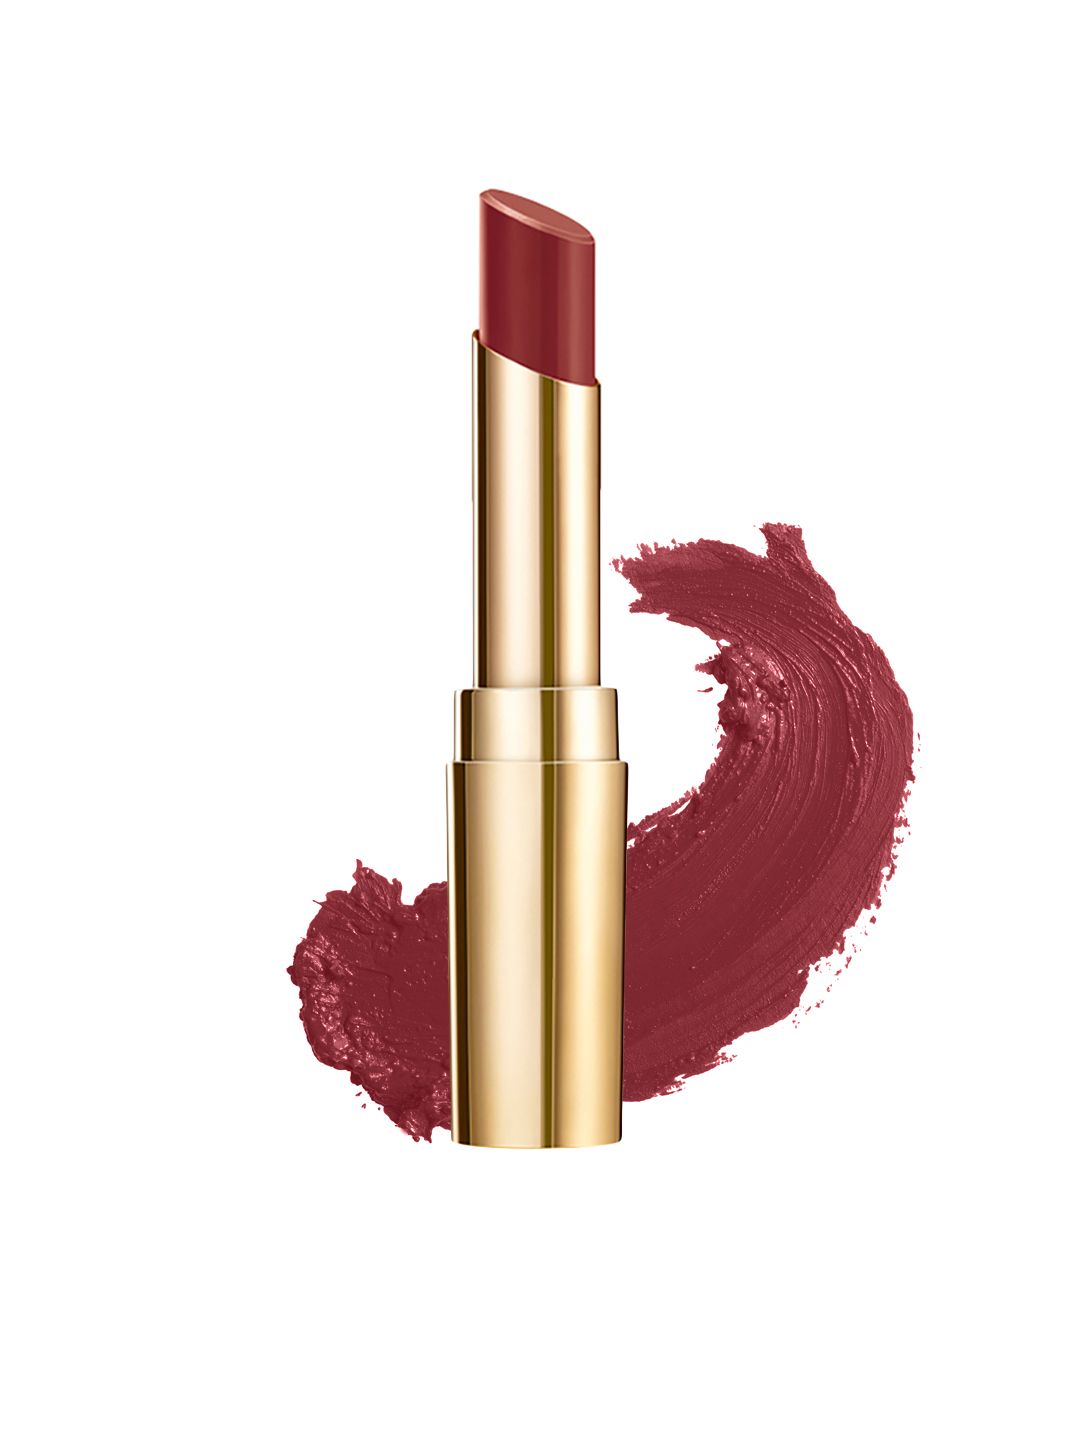 Lakme Absolute Matte Ultimate Lip Color- Choco Brownie 3.4gm Price in India